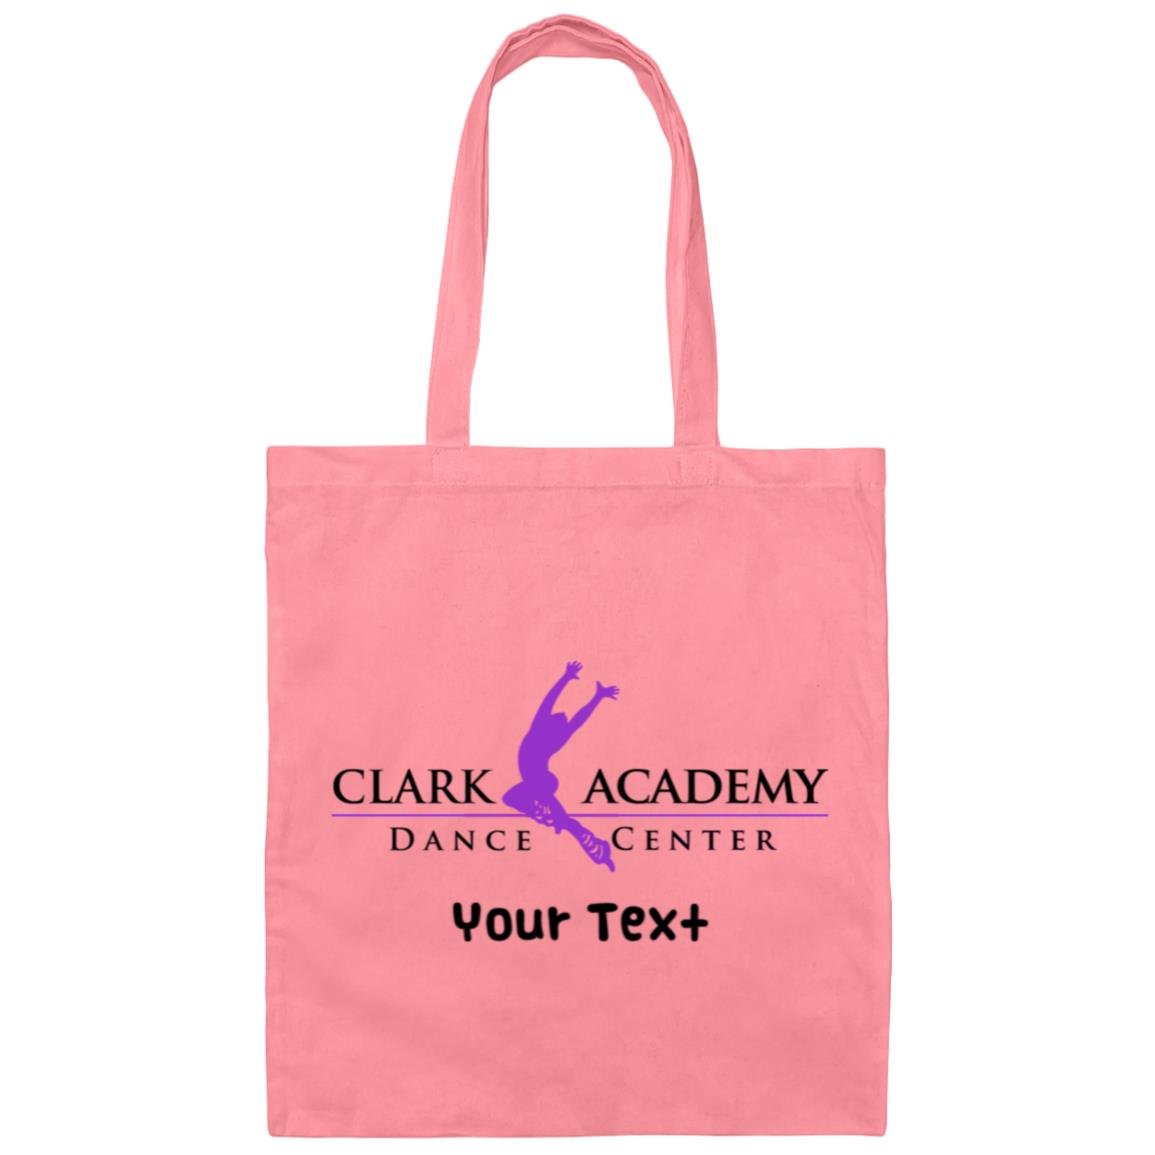 CADC Canvas Tote Bag - Free Personalization